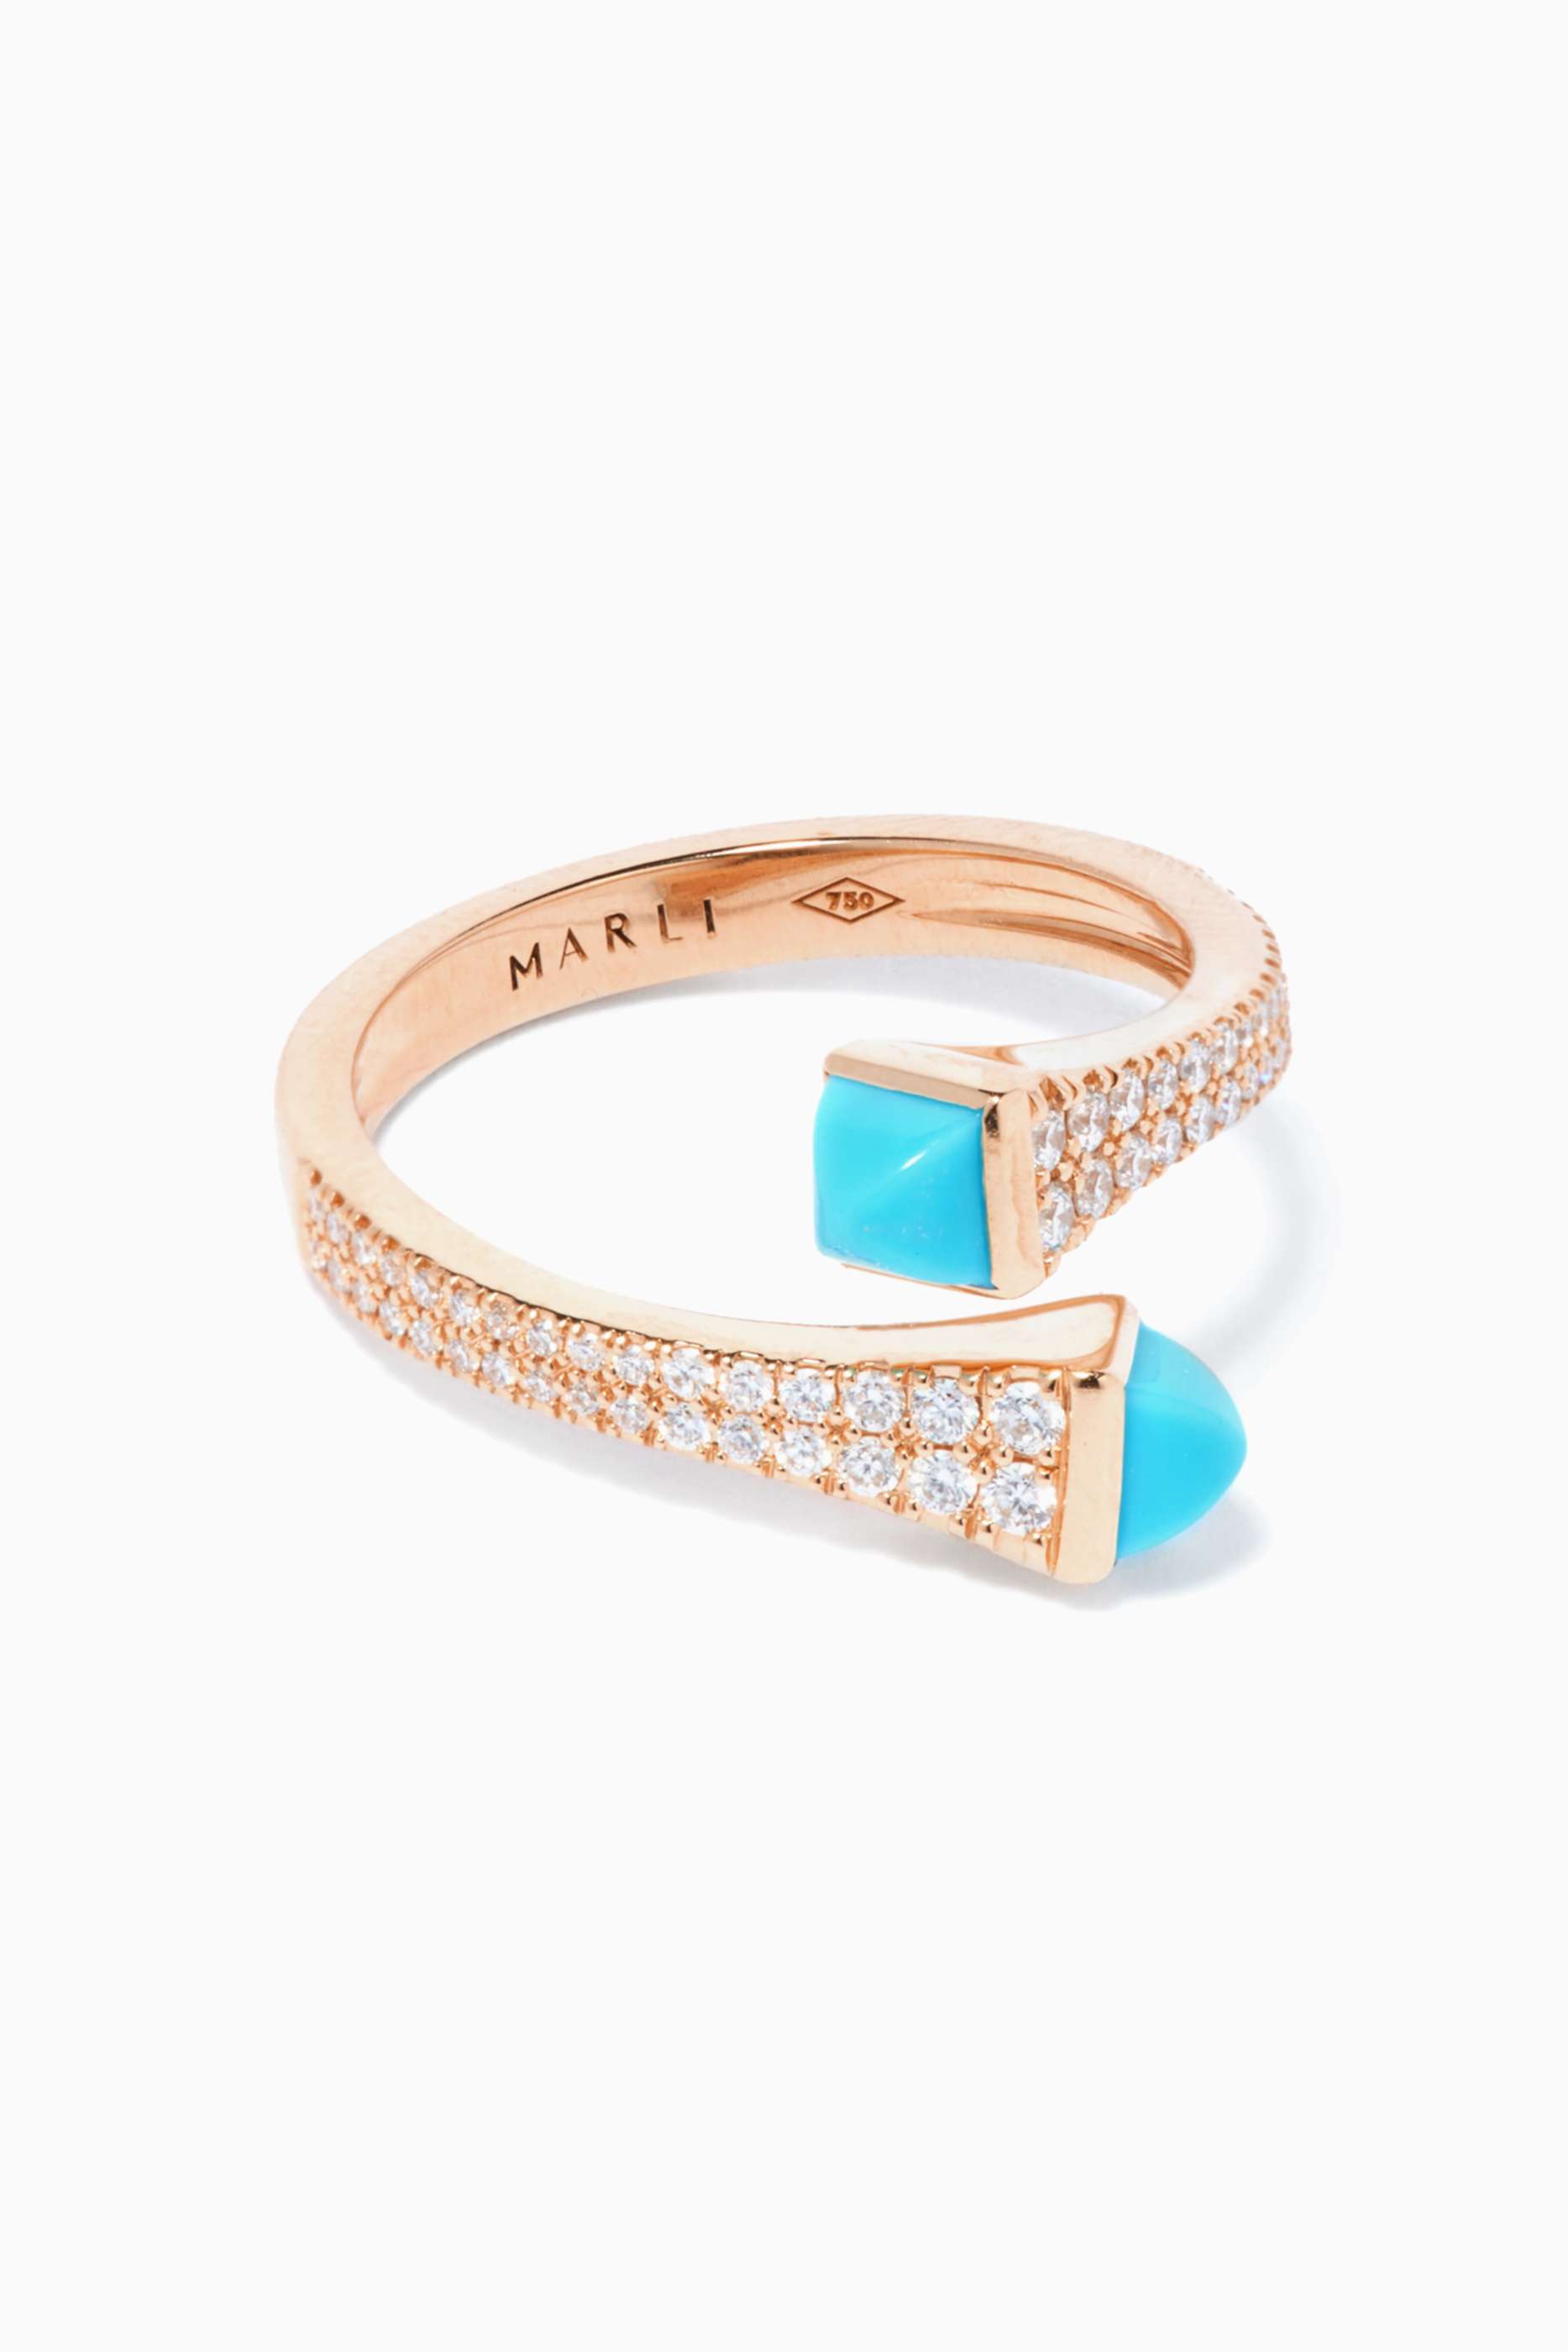 Shop Marli Rose Gold Cleo Sea Blue Chalcedony Diamond Ring in 18kt 